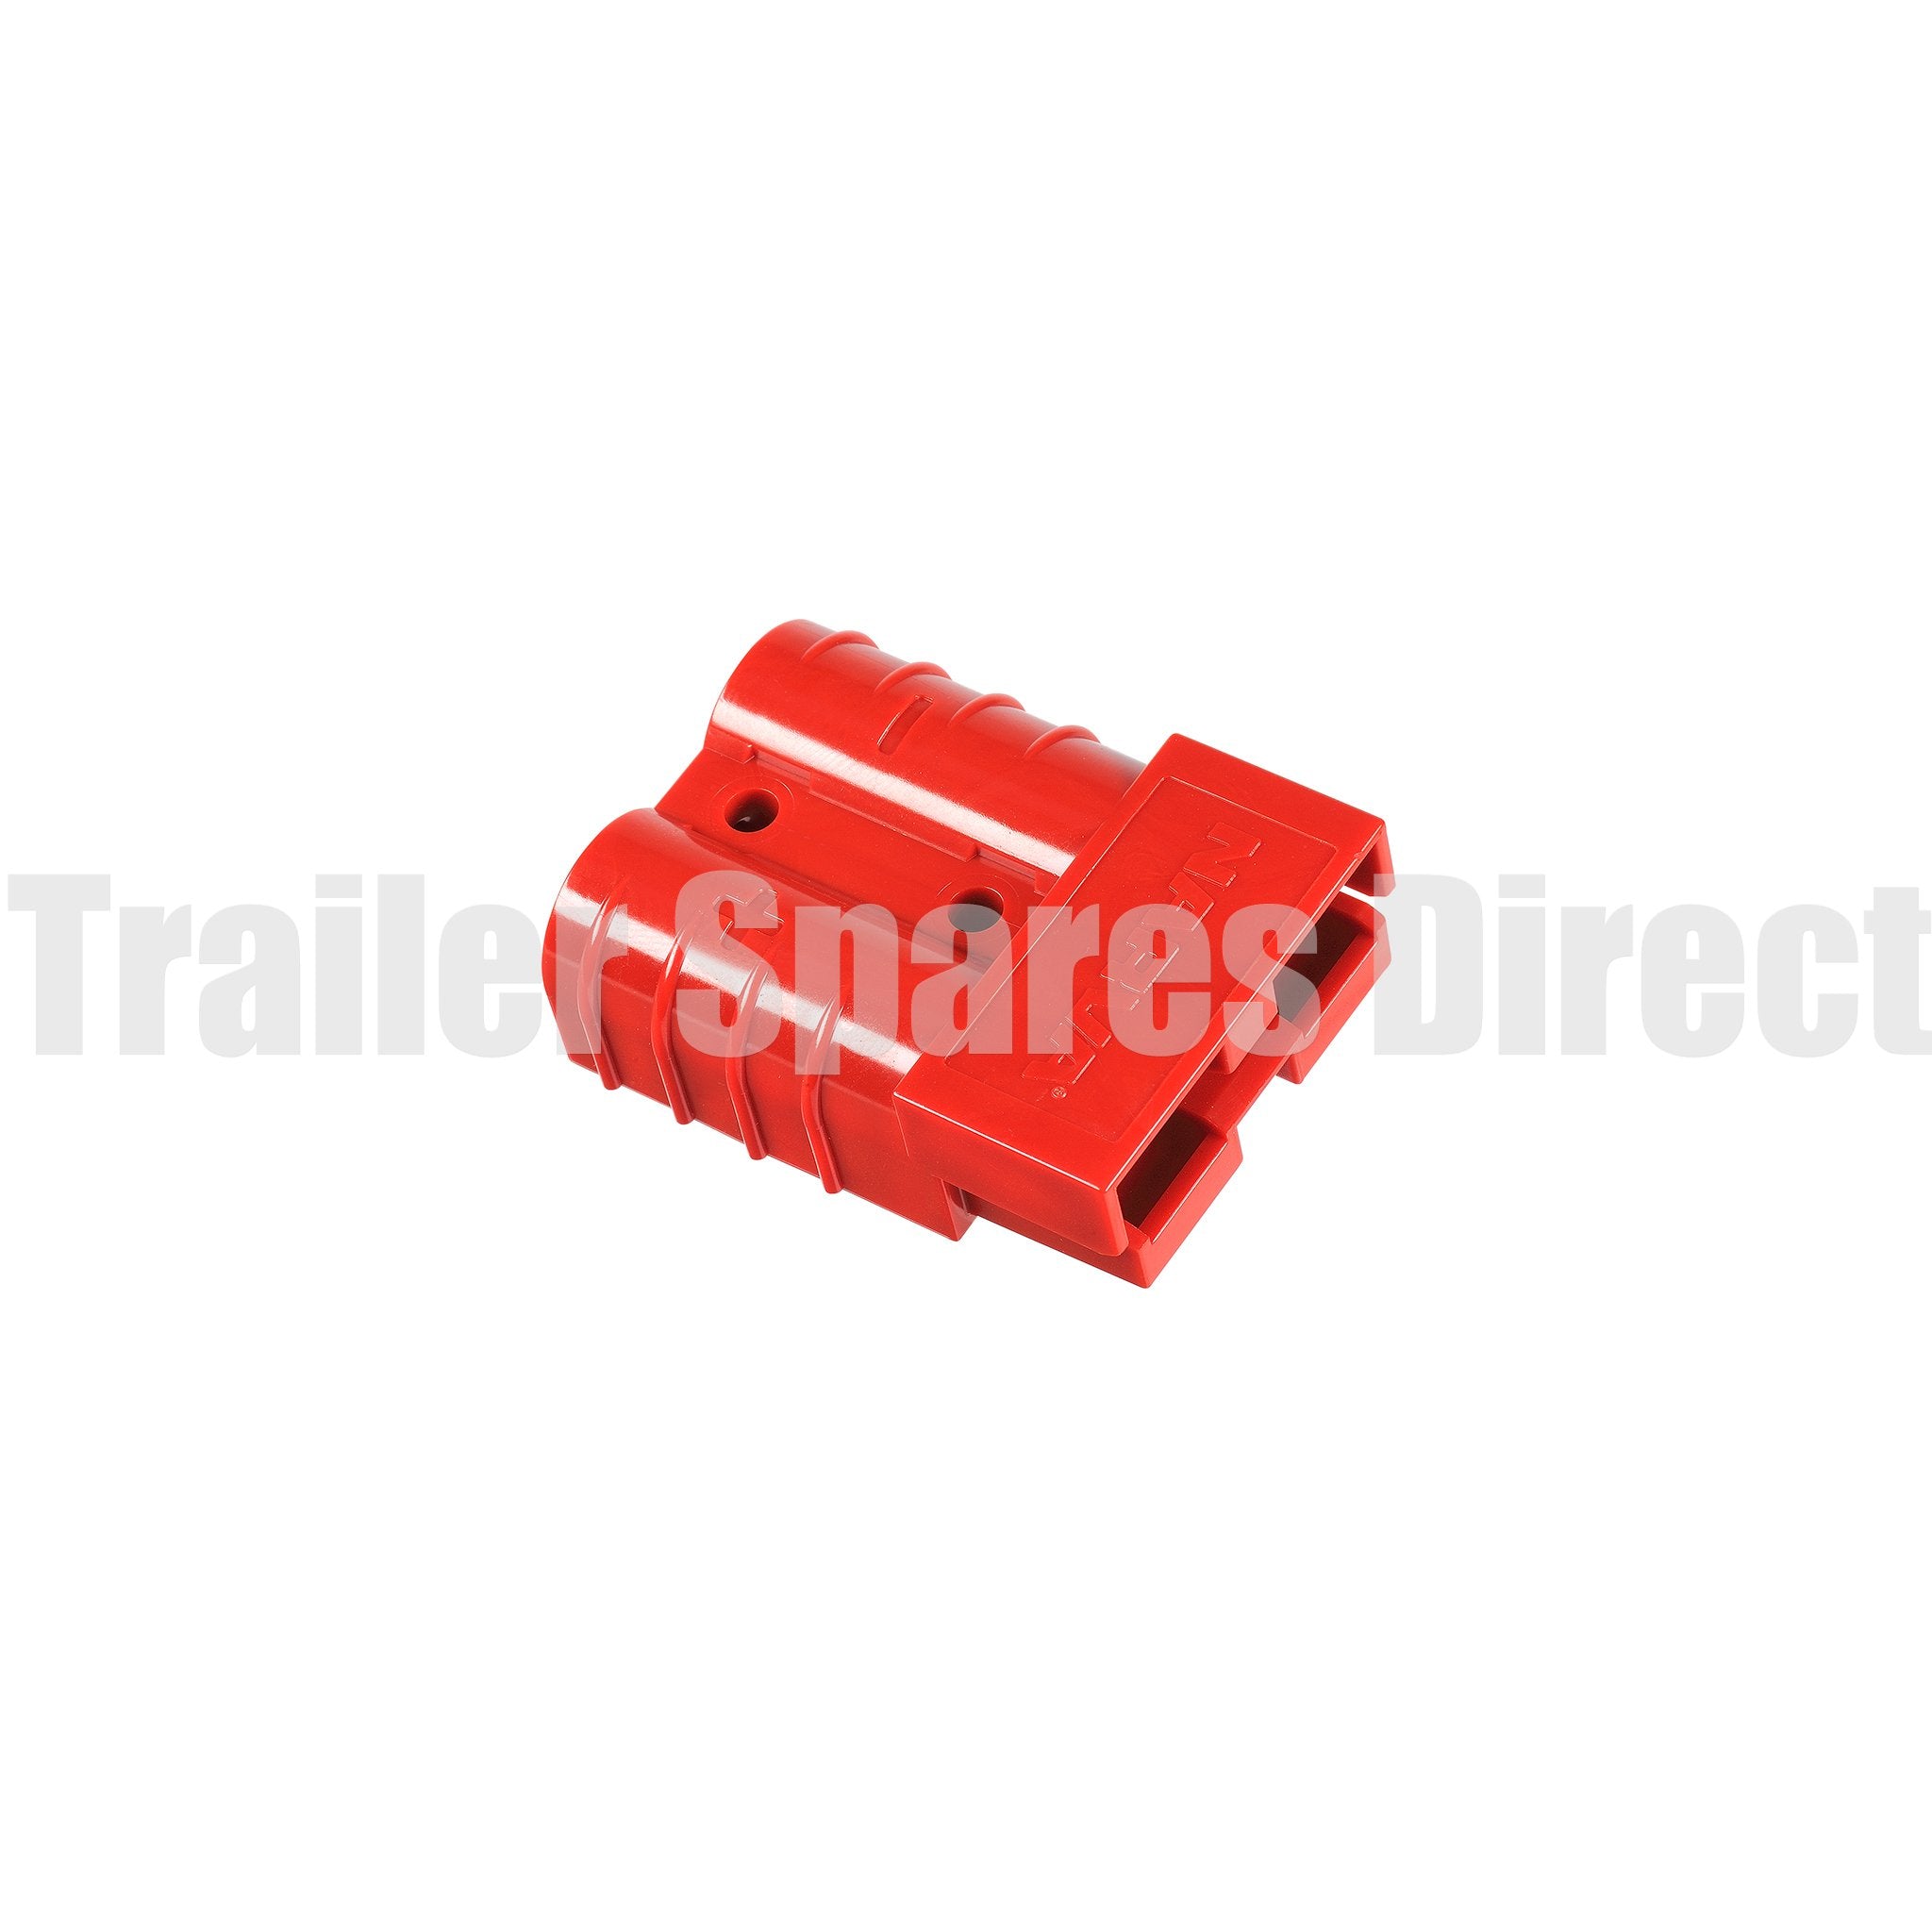 narva red connector - anderson-type plug